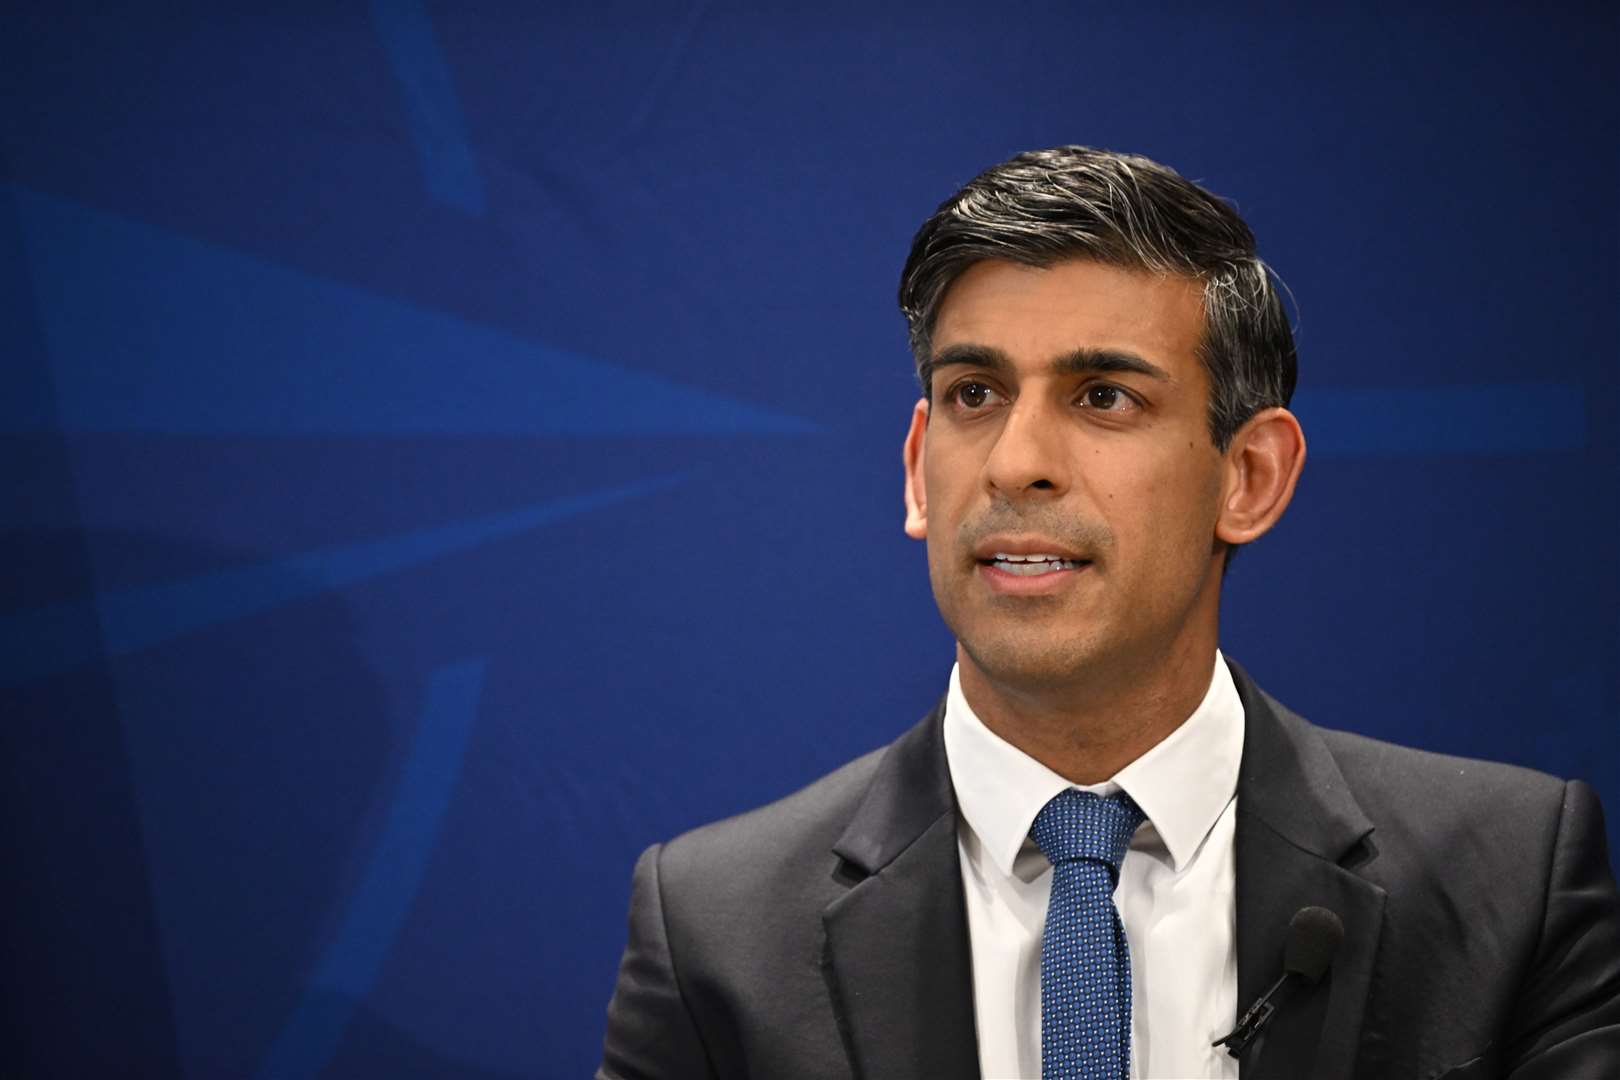 Prime Minister Rishi Sunak said ‘fairness’ for both workers and taxpayers will be at the heart of any decisions (PA)